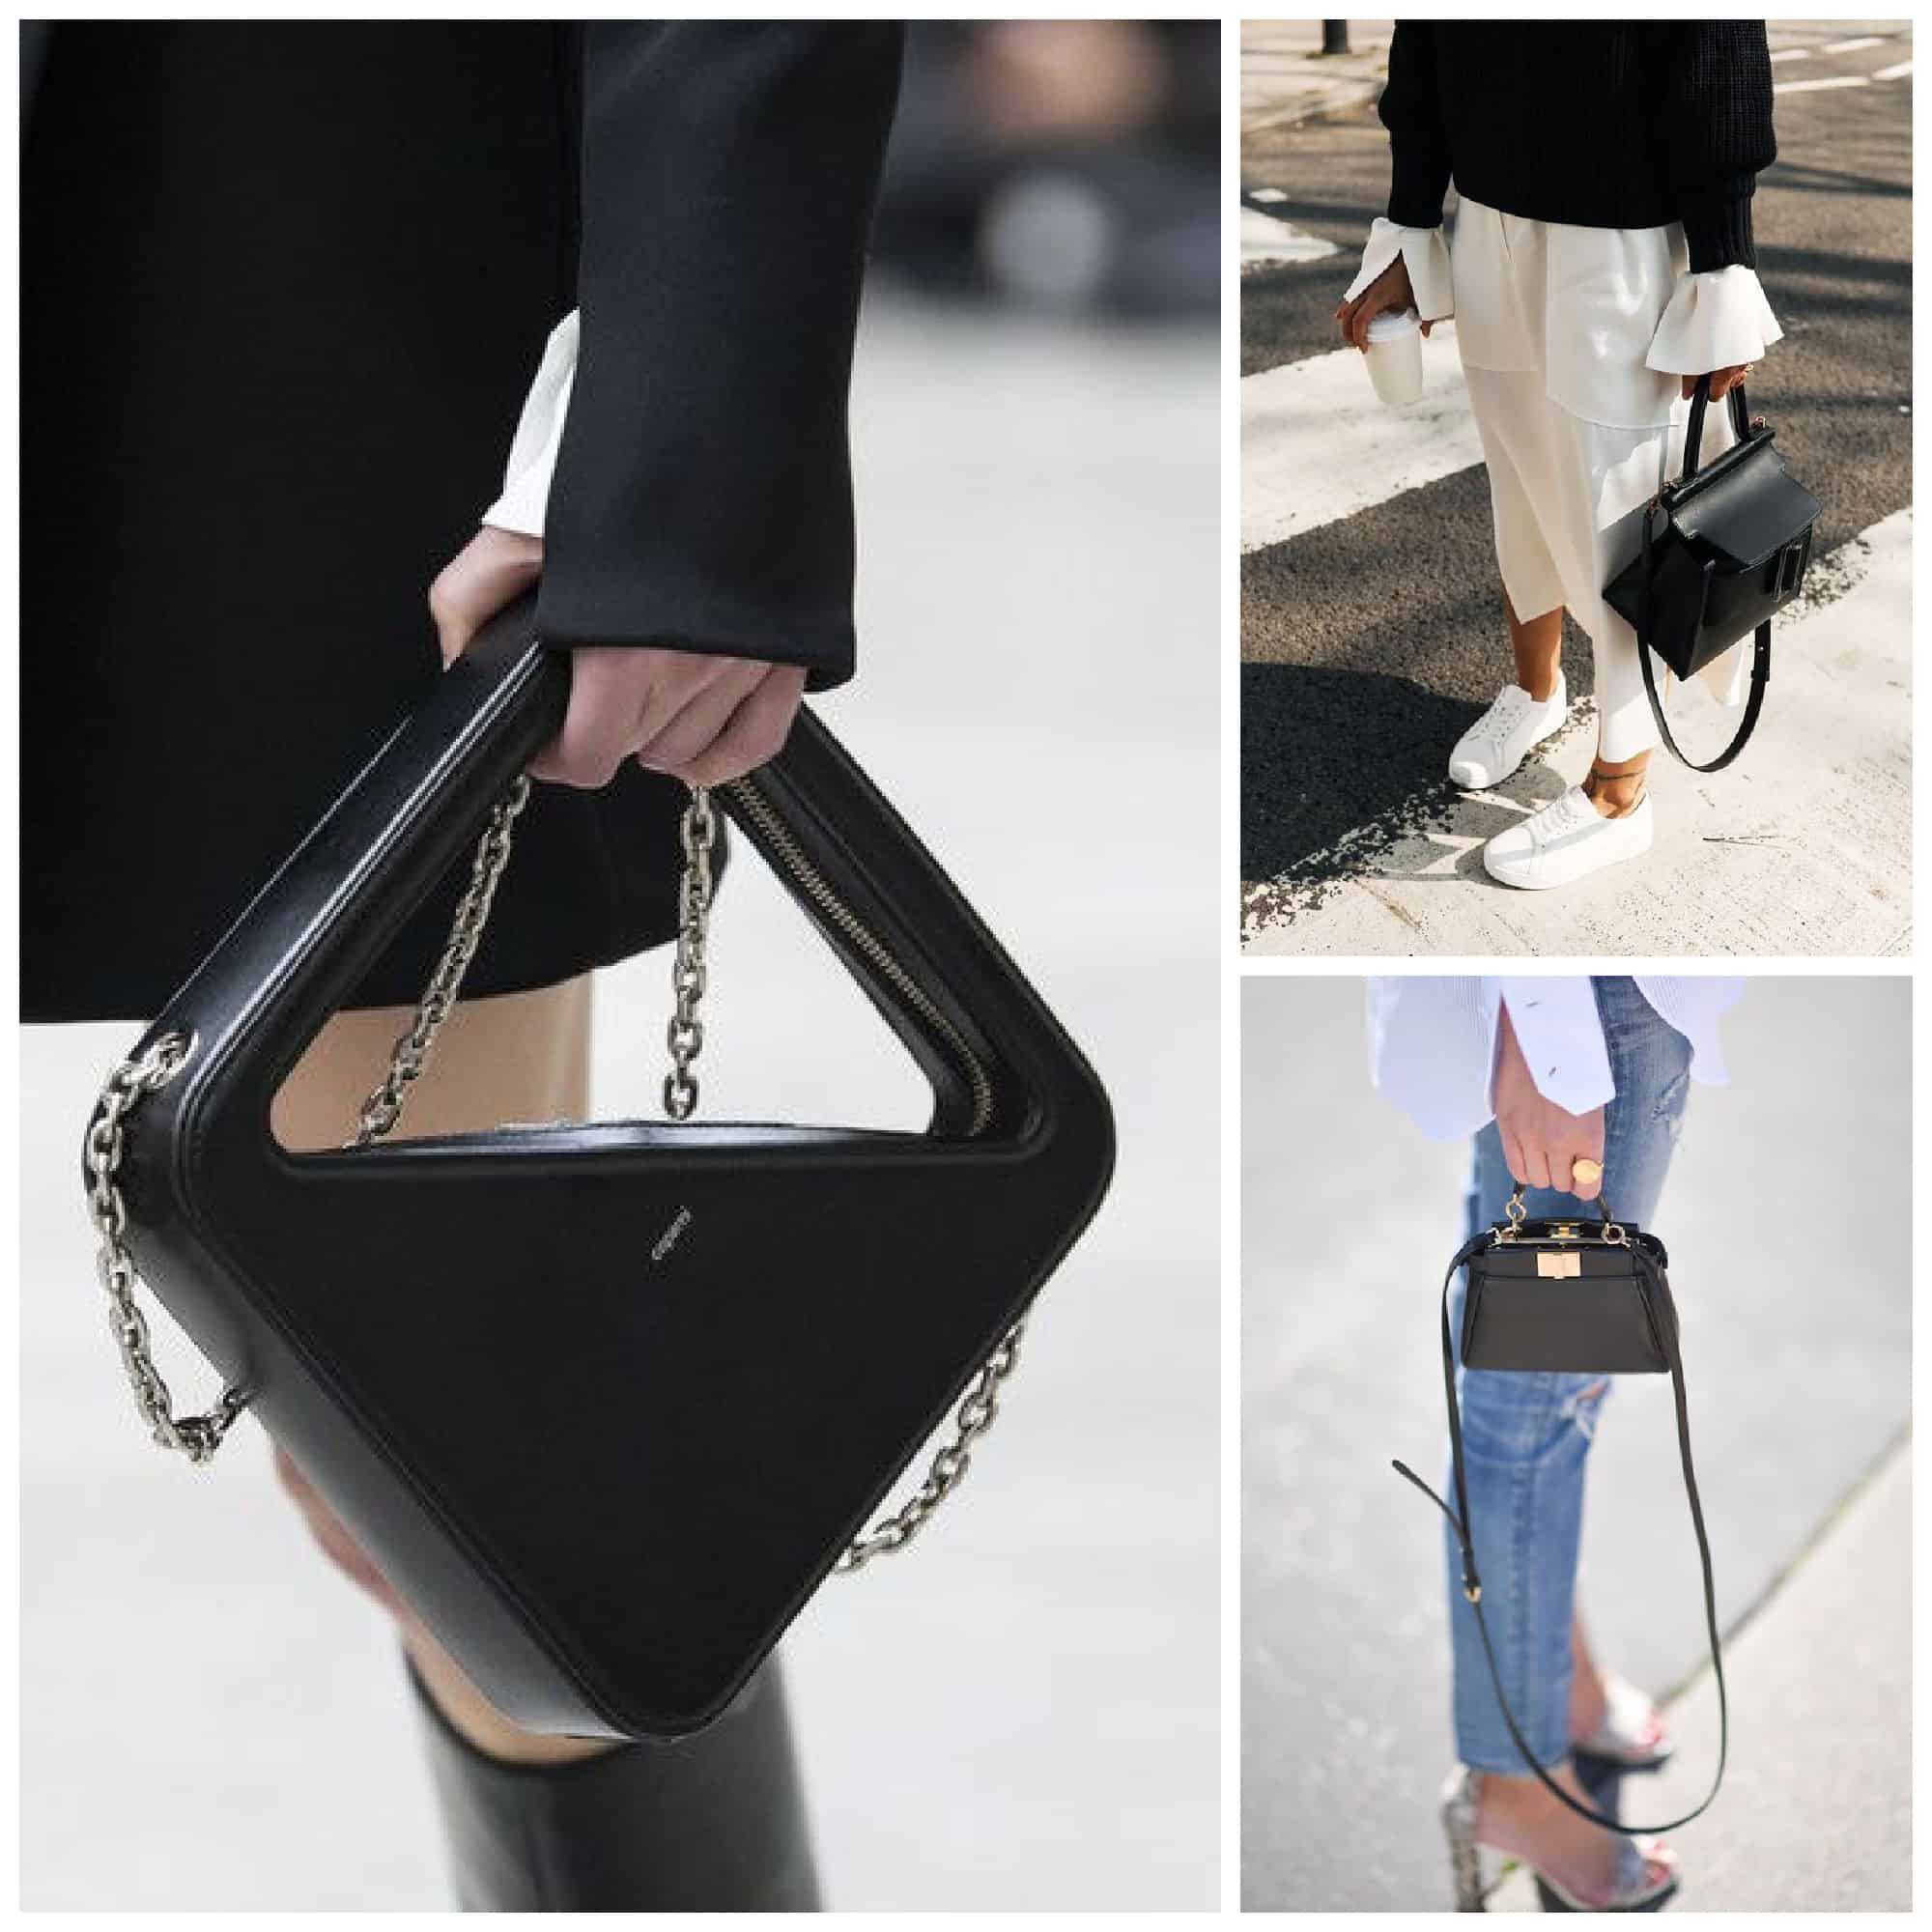 Pin on Style * Bags and purses.